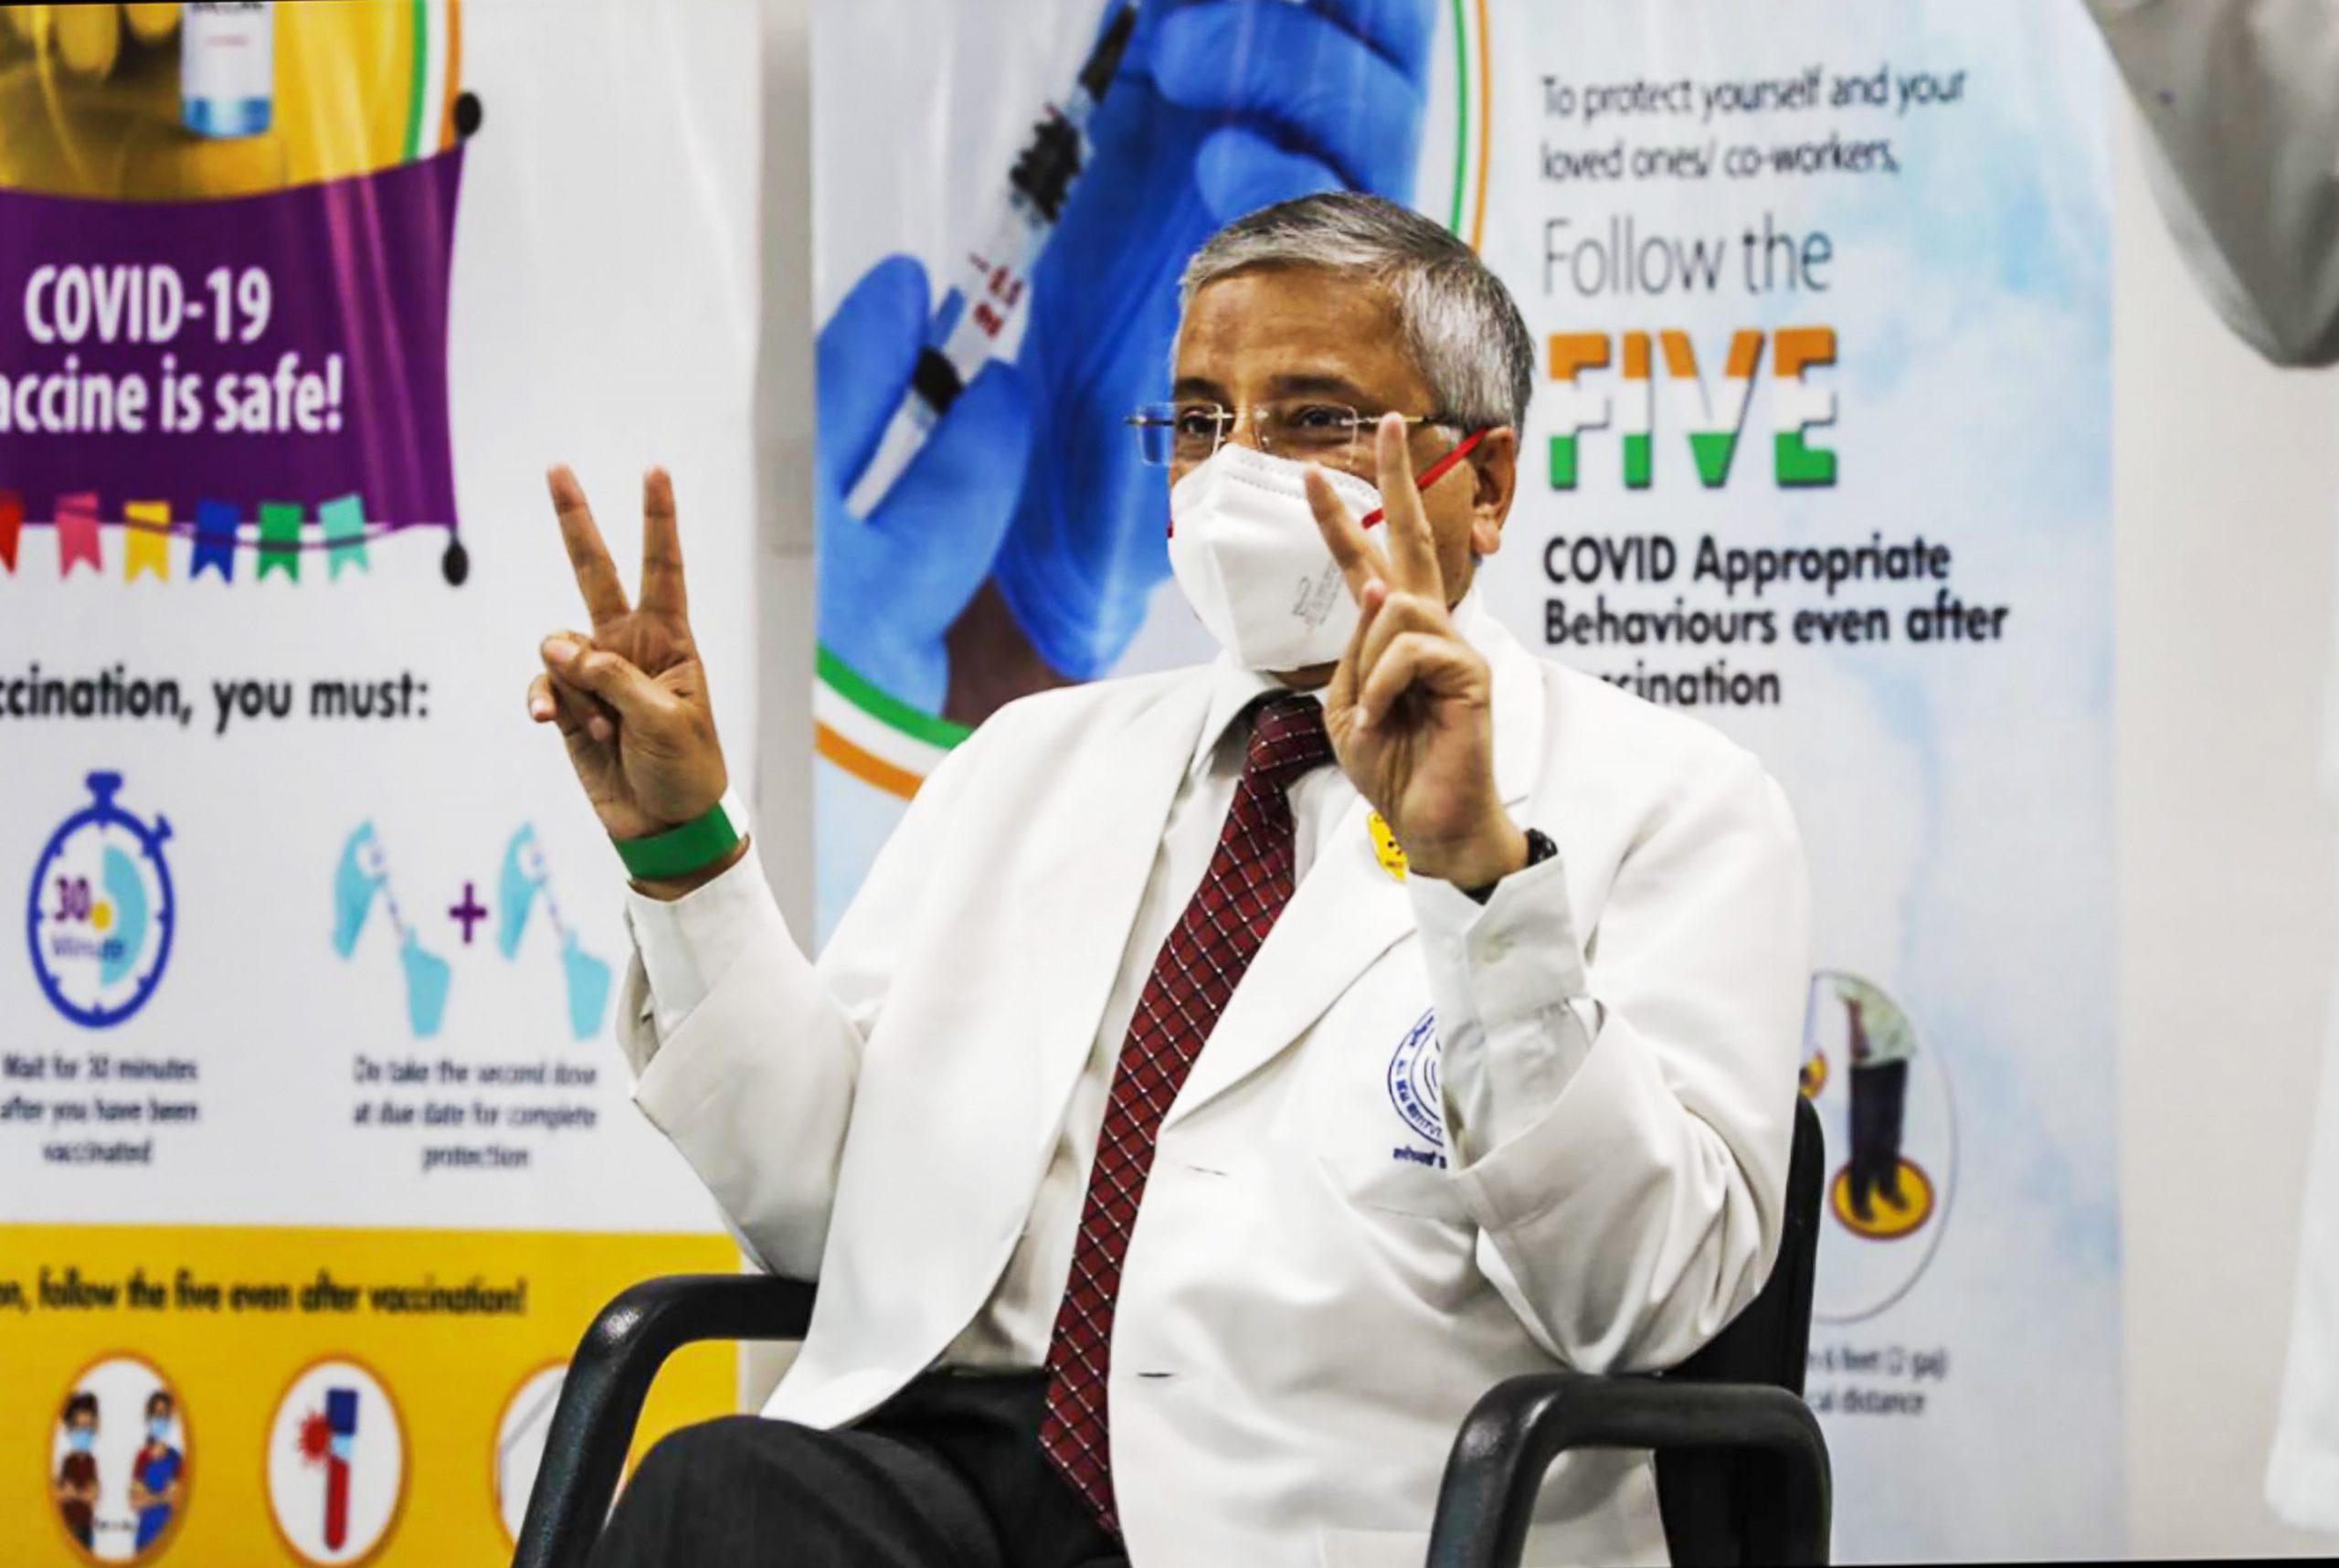 Omicron has potential of developing immunoescape mechanisms: AIIMS chief